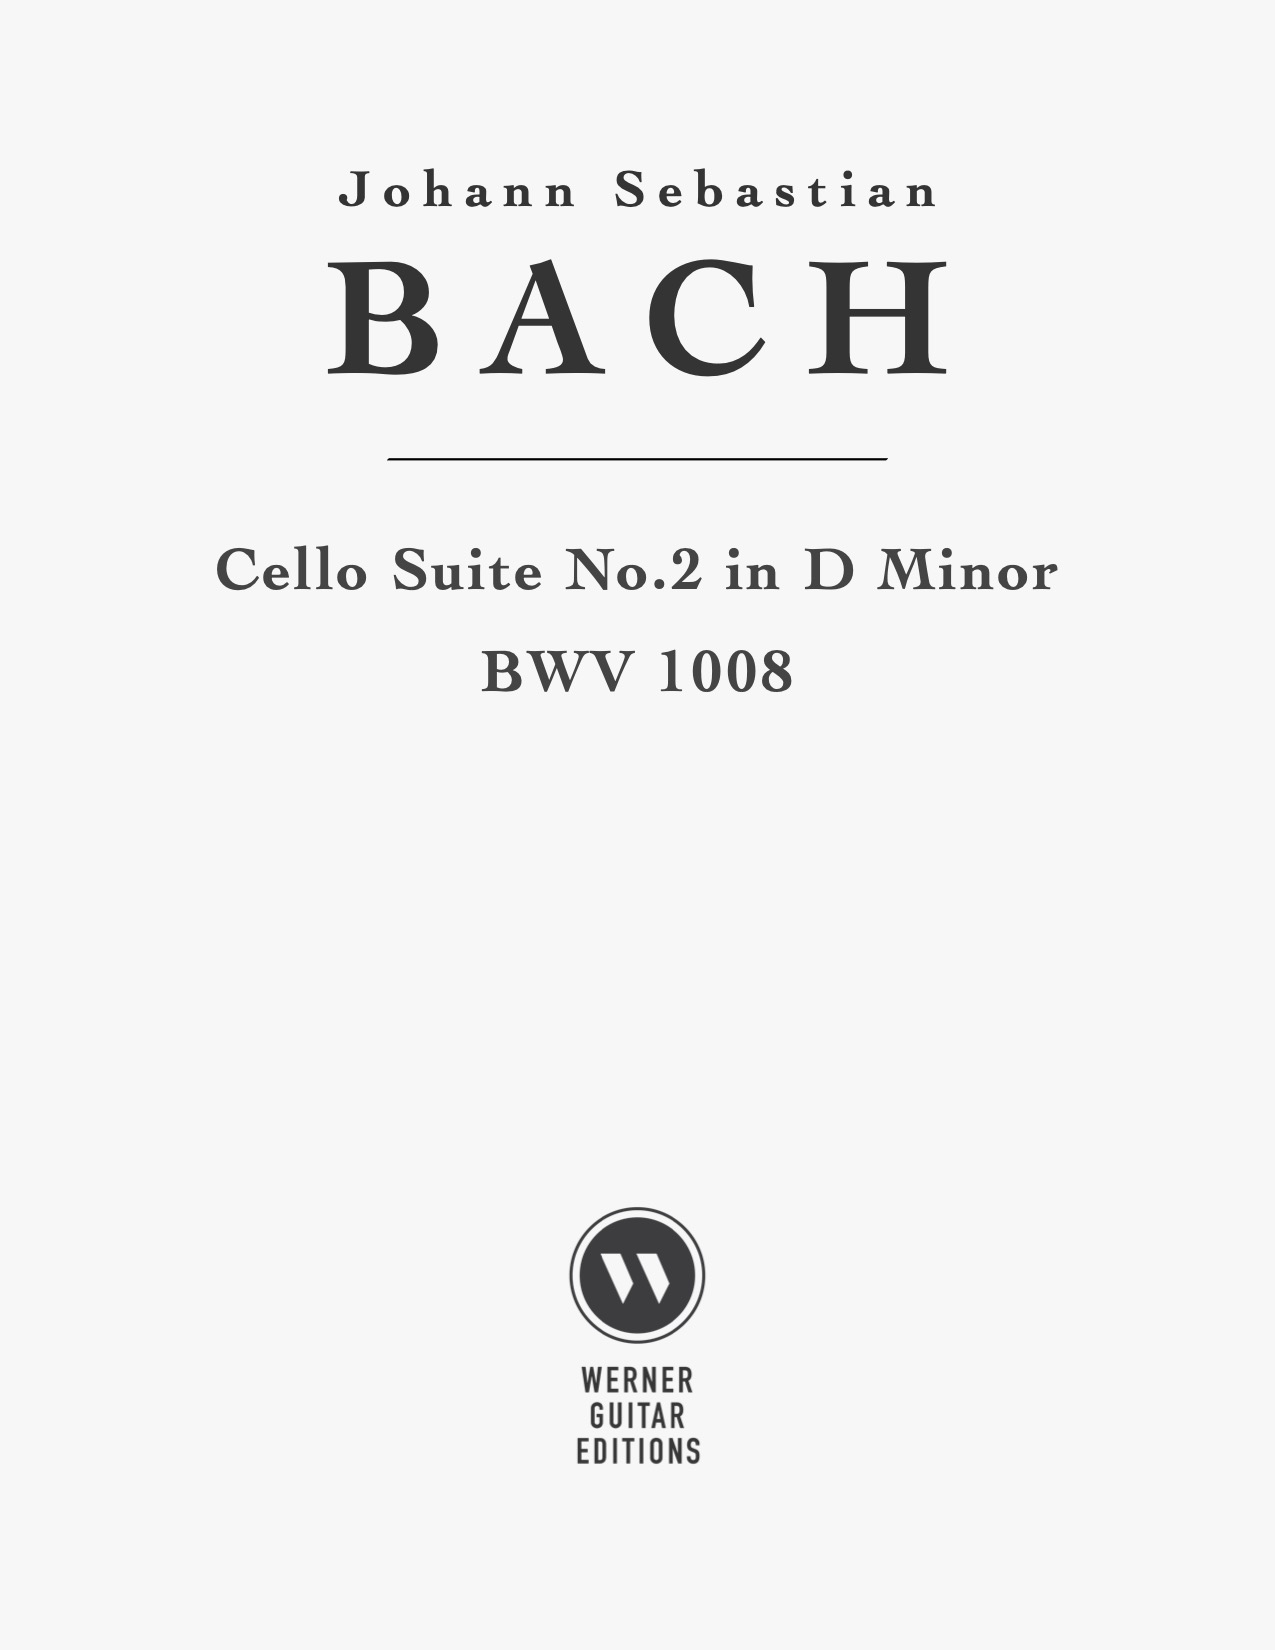 Cello Suite No.2 in D Minor, BWV 1008 by Johann Sebastian Bach (1685-1750) - PDF Sheet Music for classical guitar.